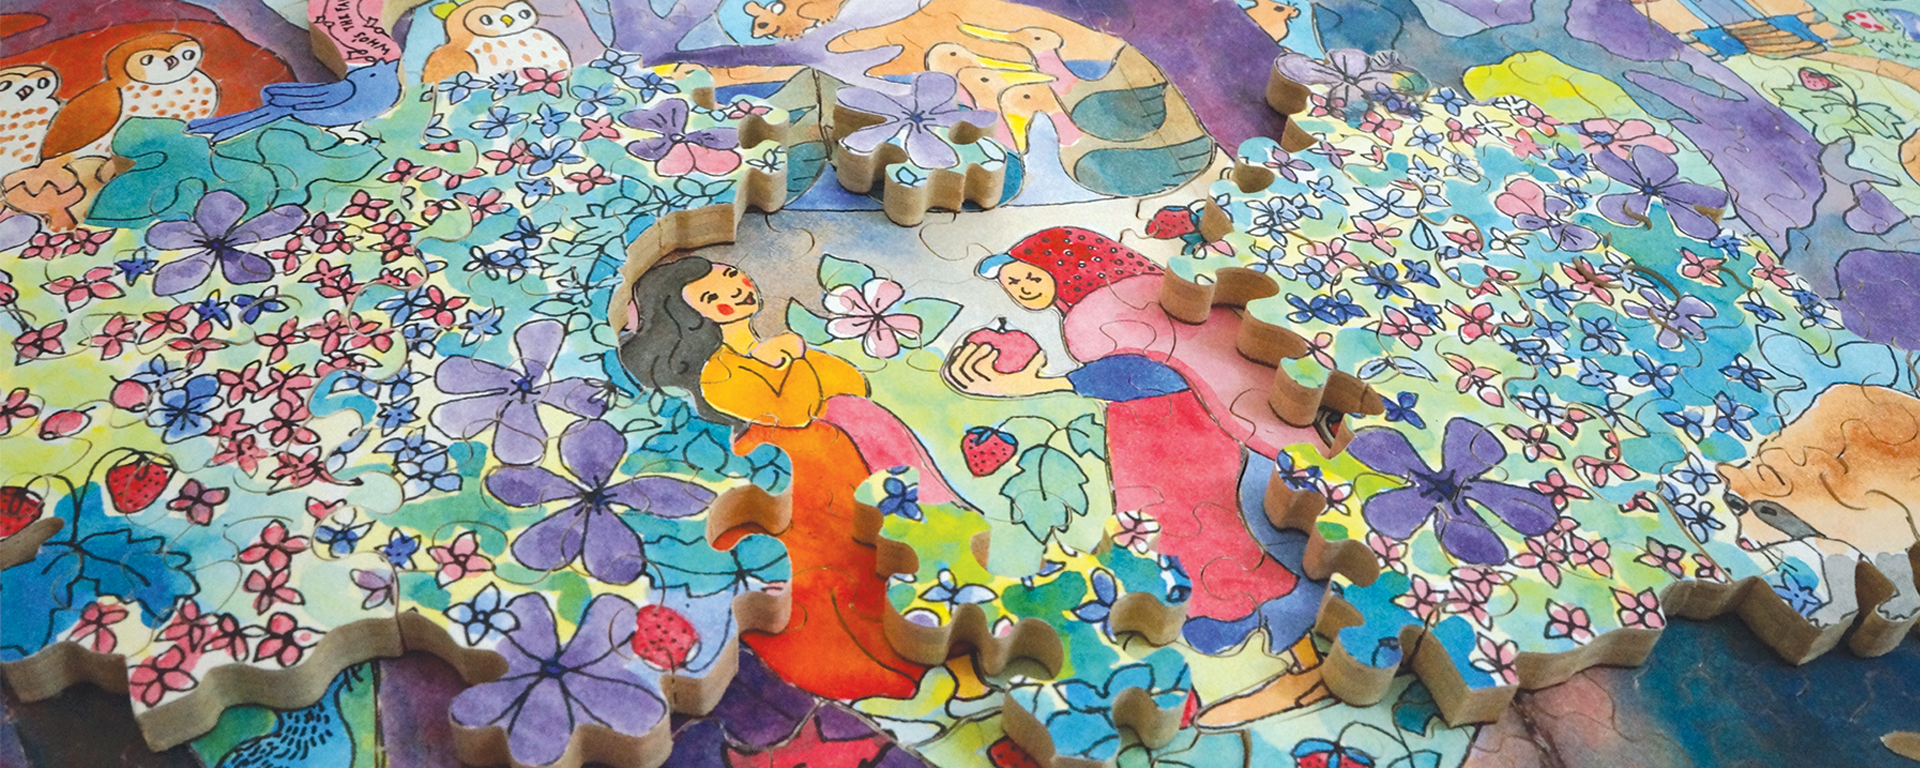 Wooden jigsaw puzzle depicting a woman in the forest surrounded by woodland animals and flowers and an old woman offering her an apple.